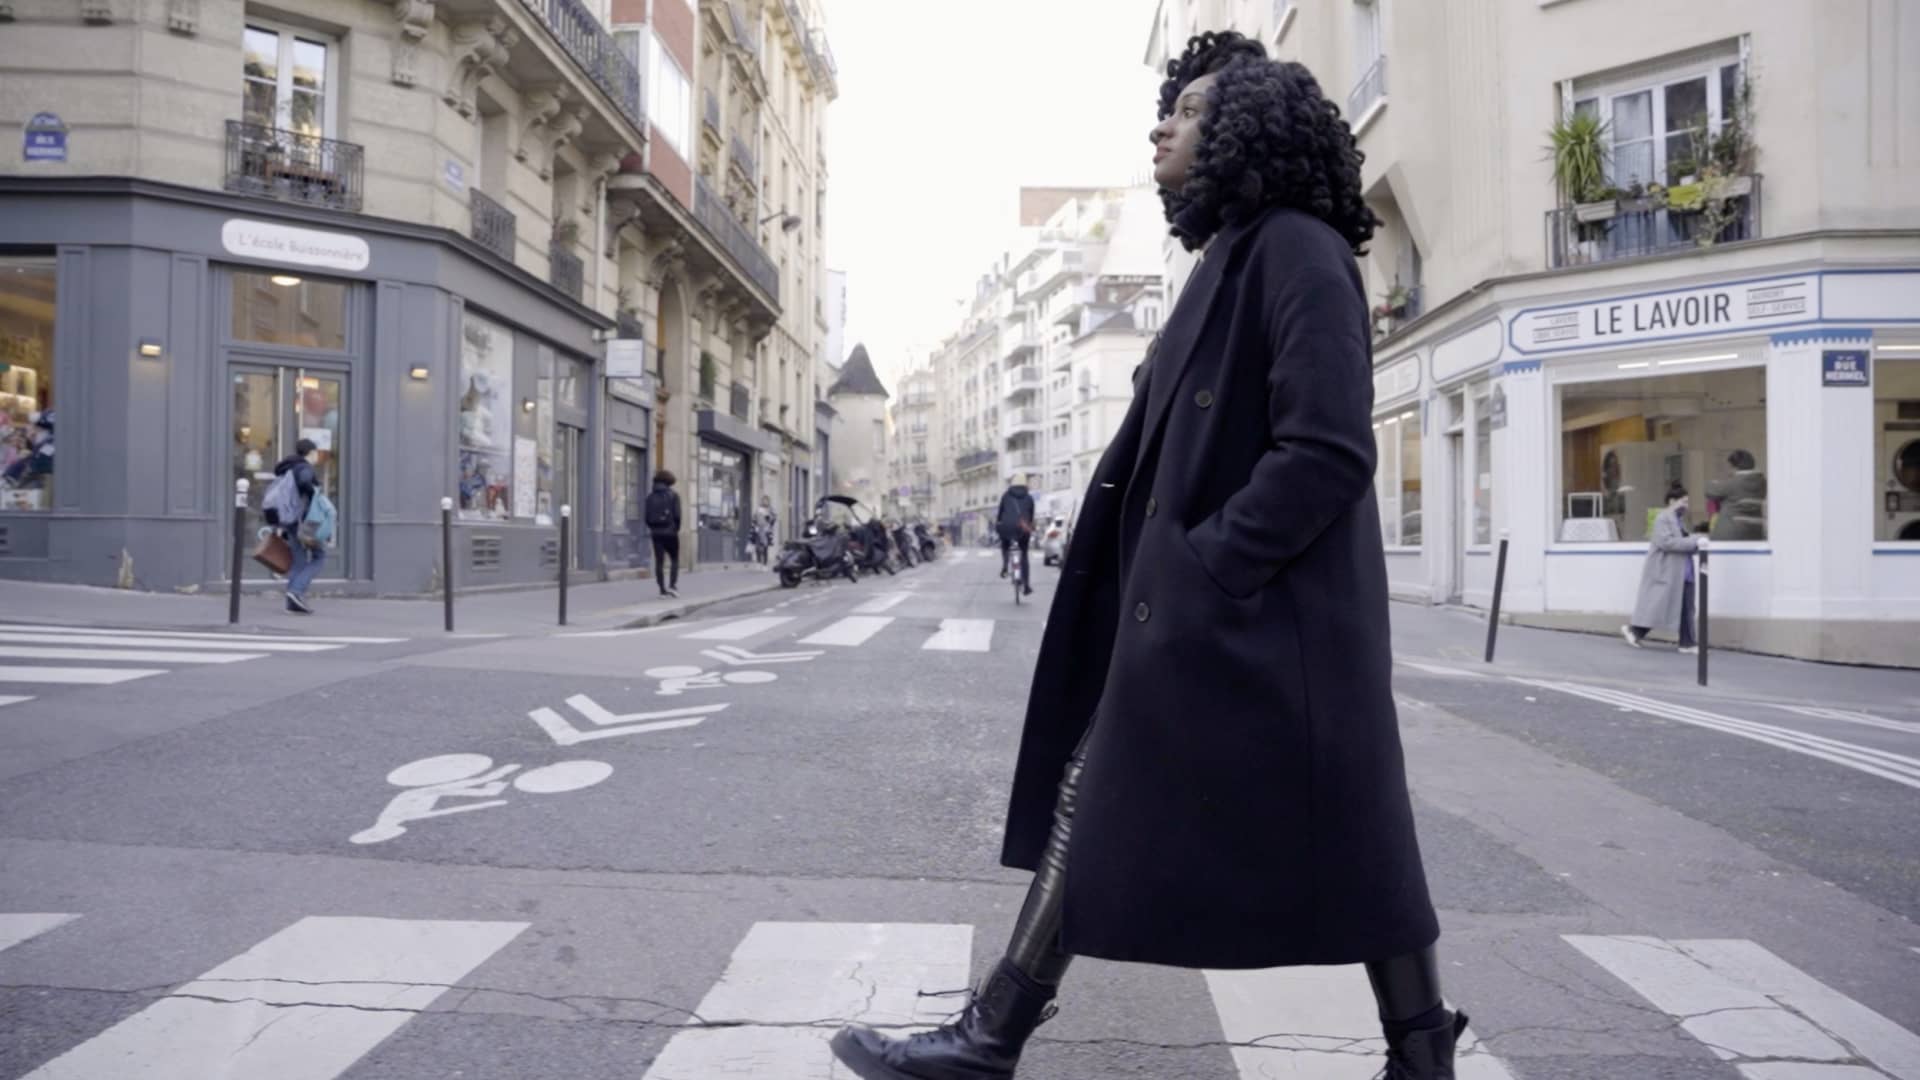 Davis takes a stroll in her neighborhood, which is in Paris' 18th arrondissement.